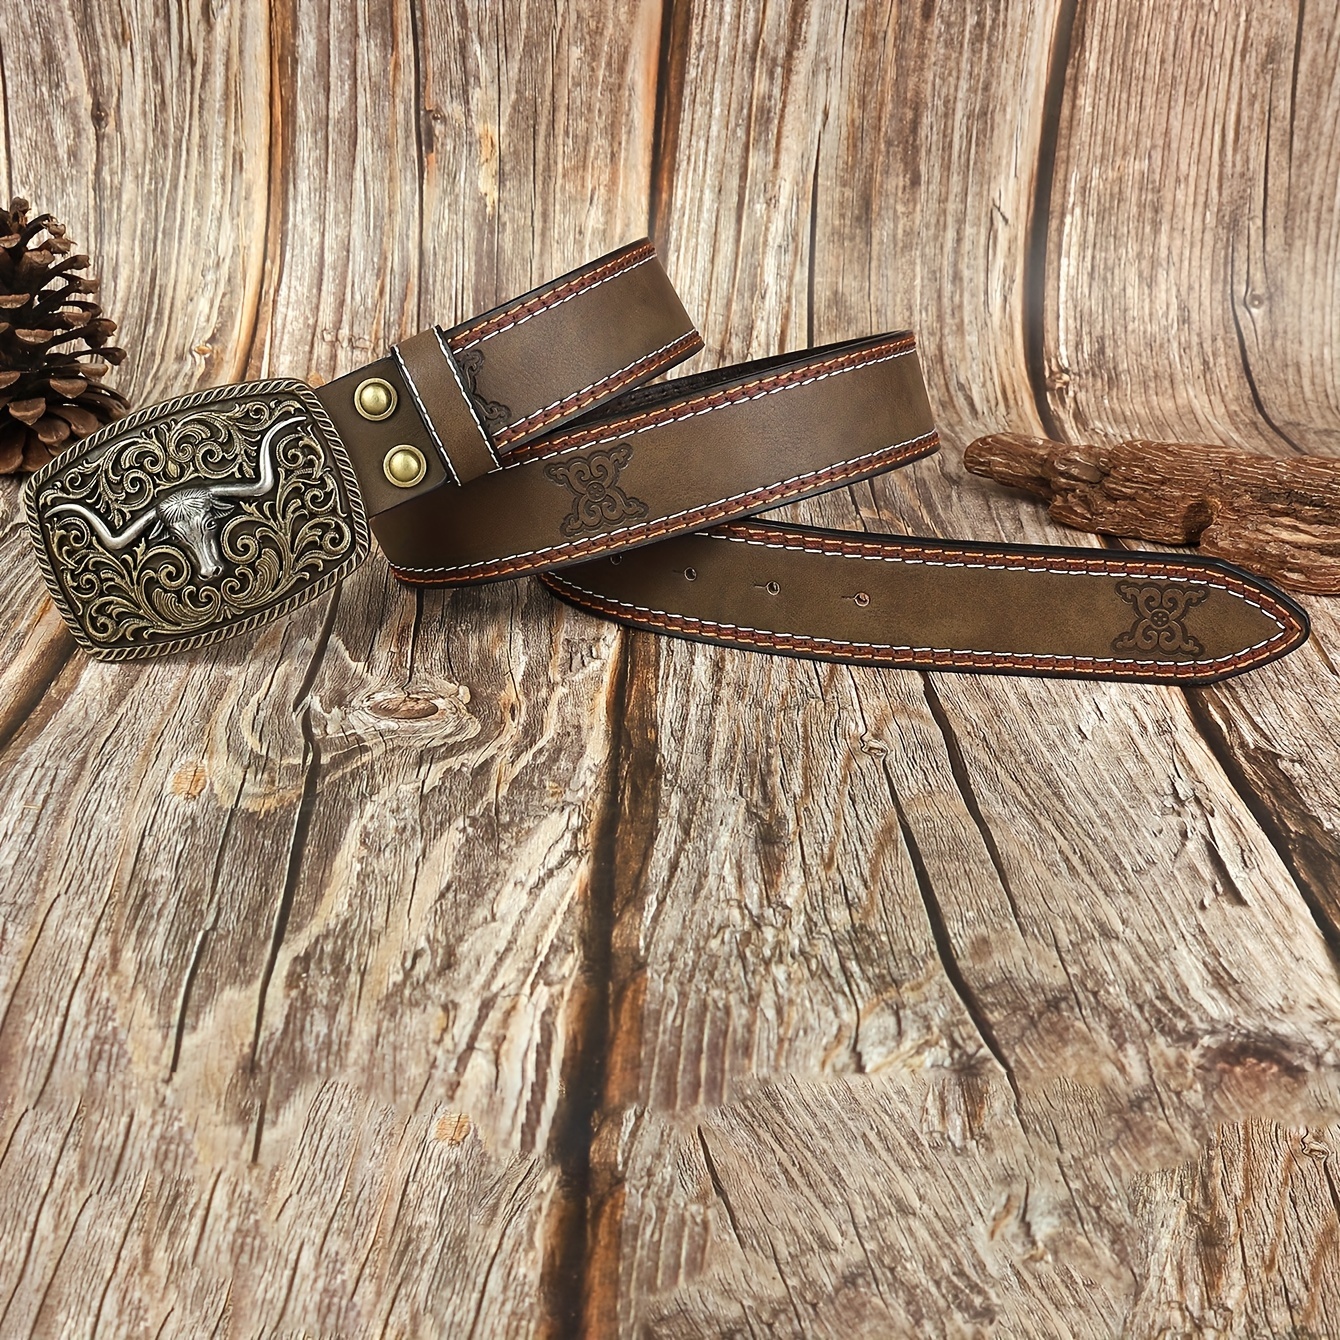 Unisex Brown Leather Belt With Mexican Eagle Rhinestone – Texas